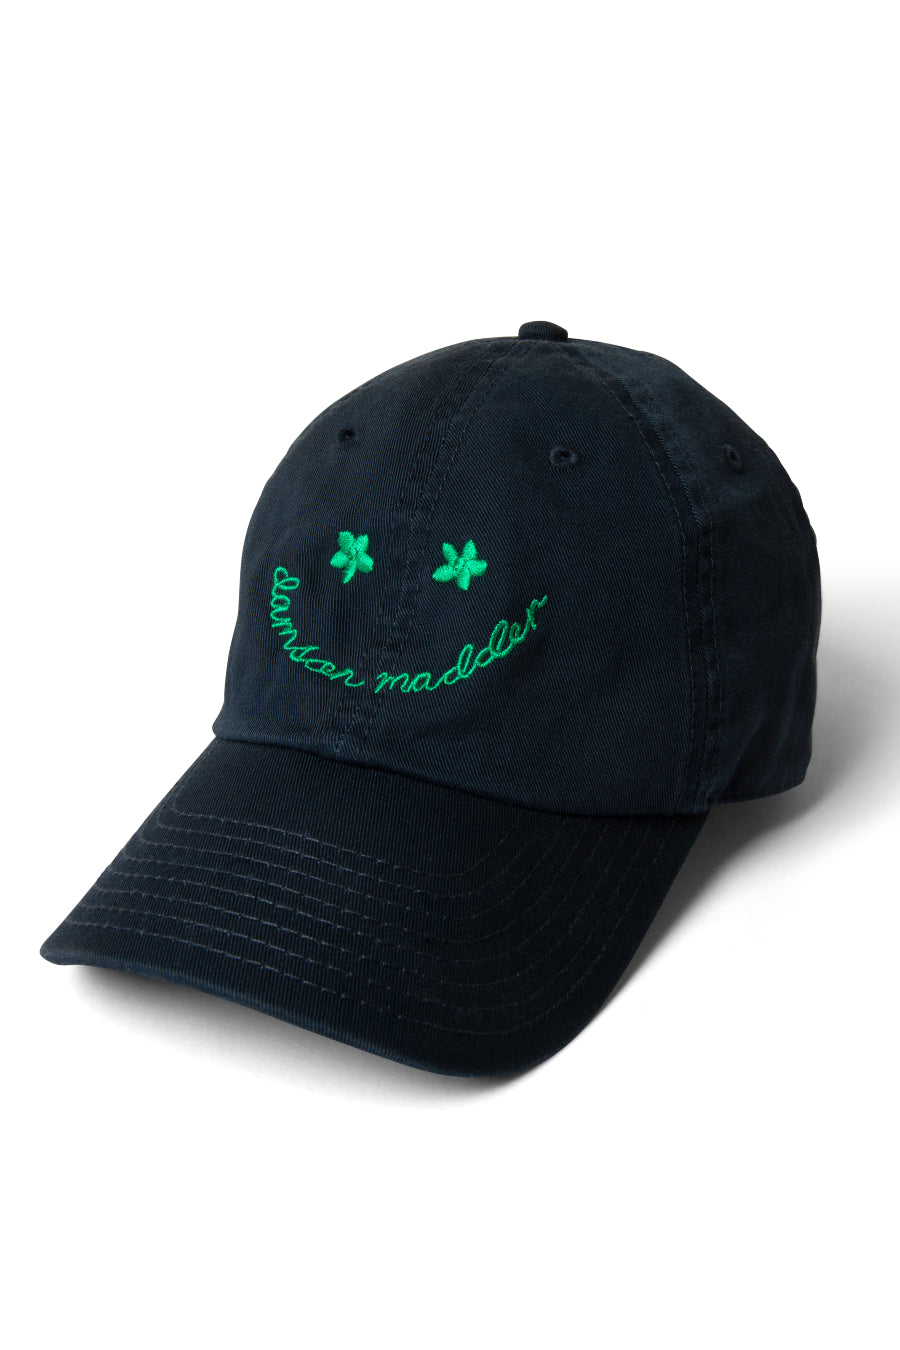 embroidered cap - navy and green